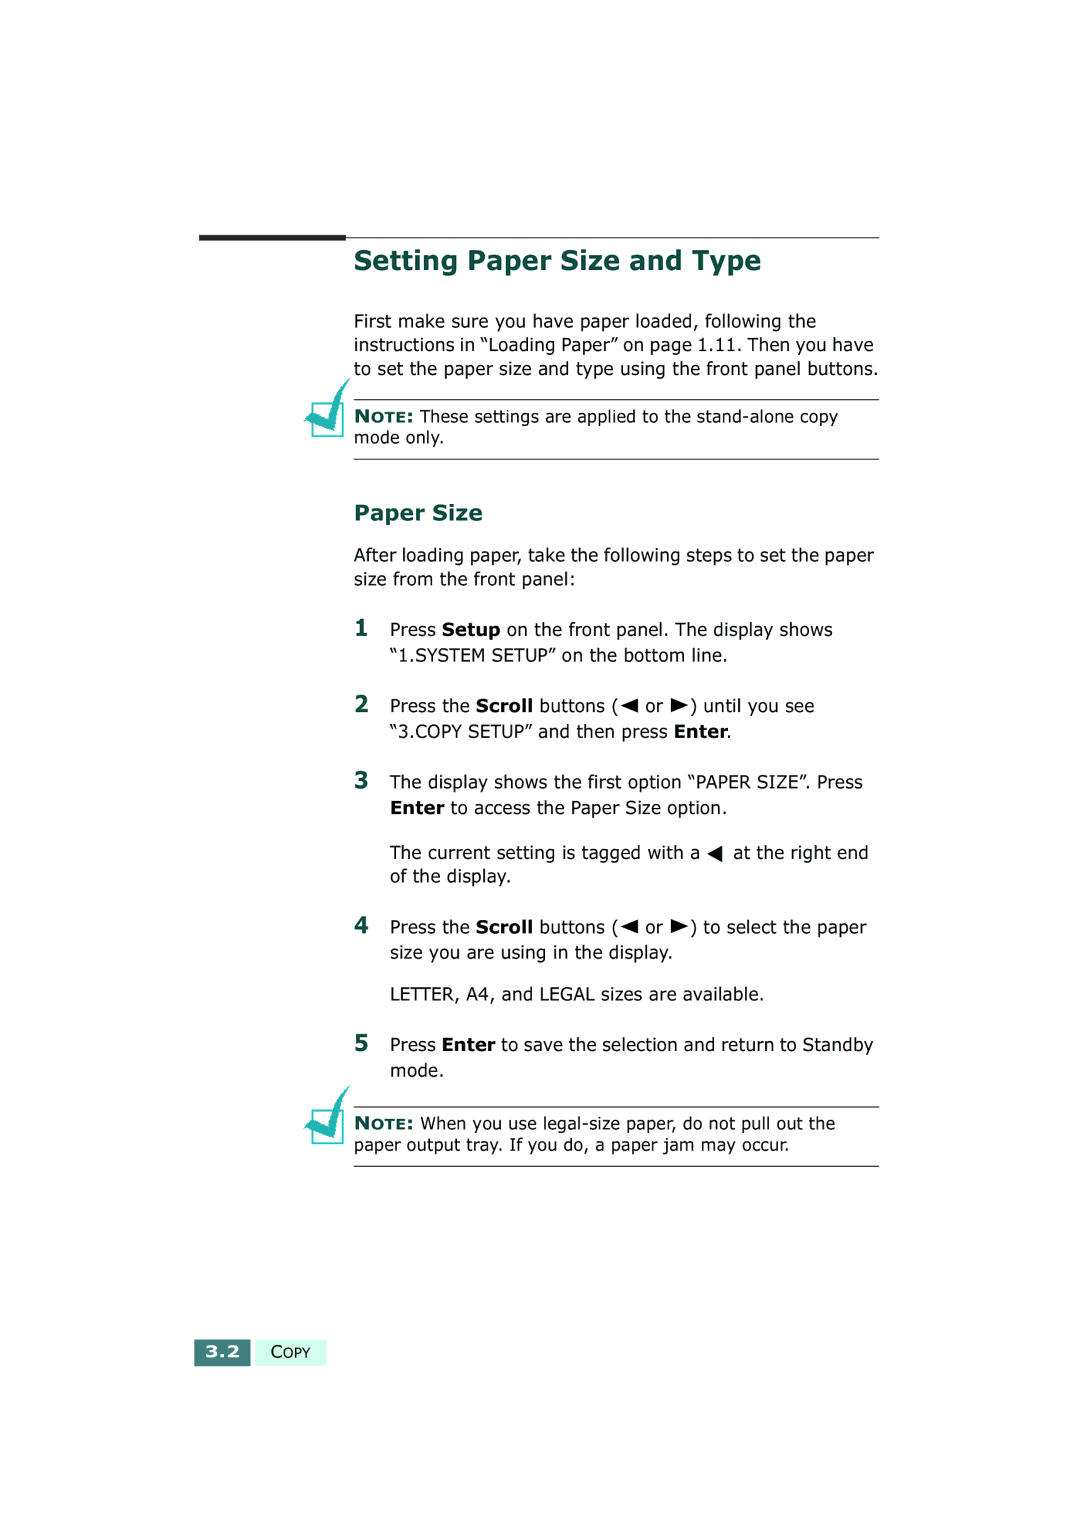 Samsung SF-430 manual Setting Paper Size and Type 